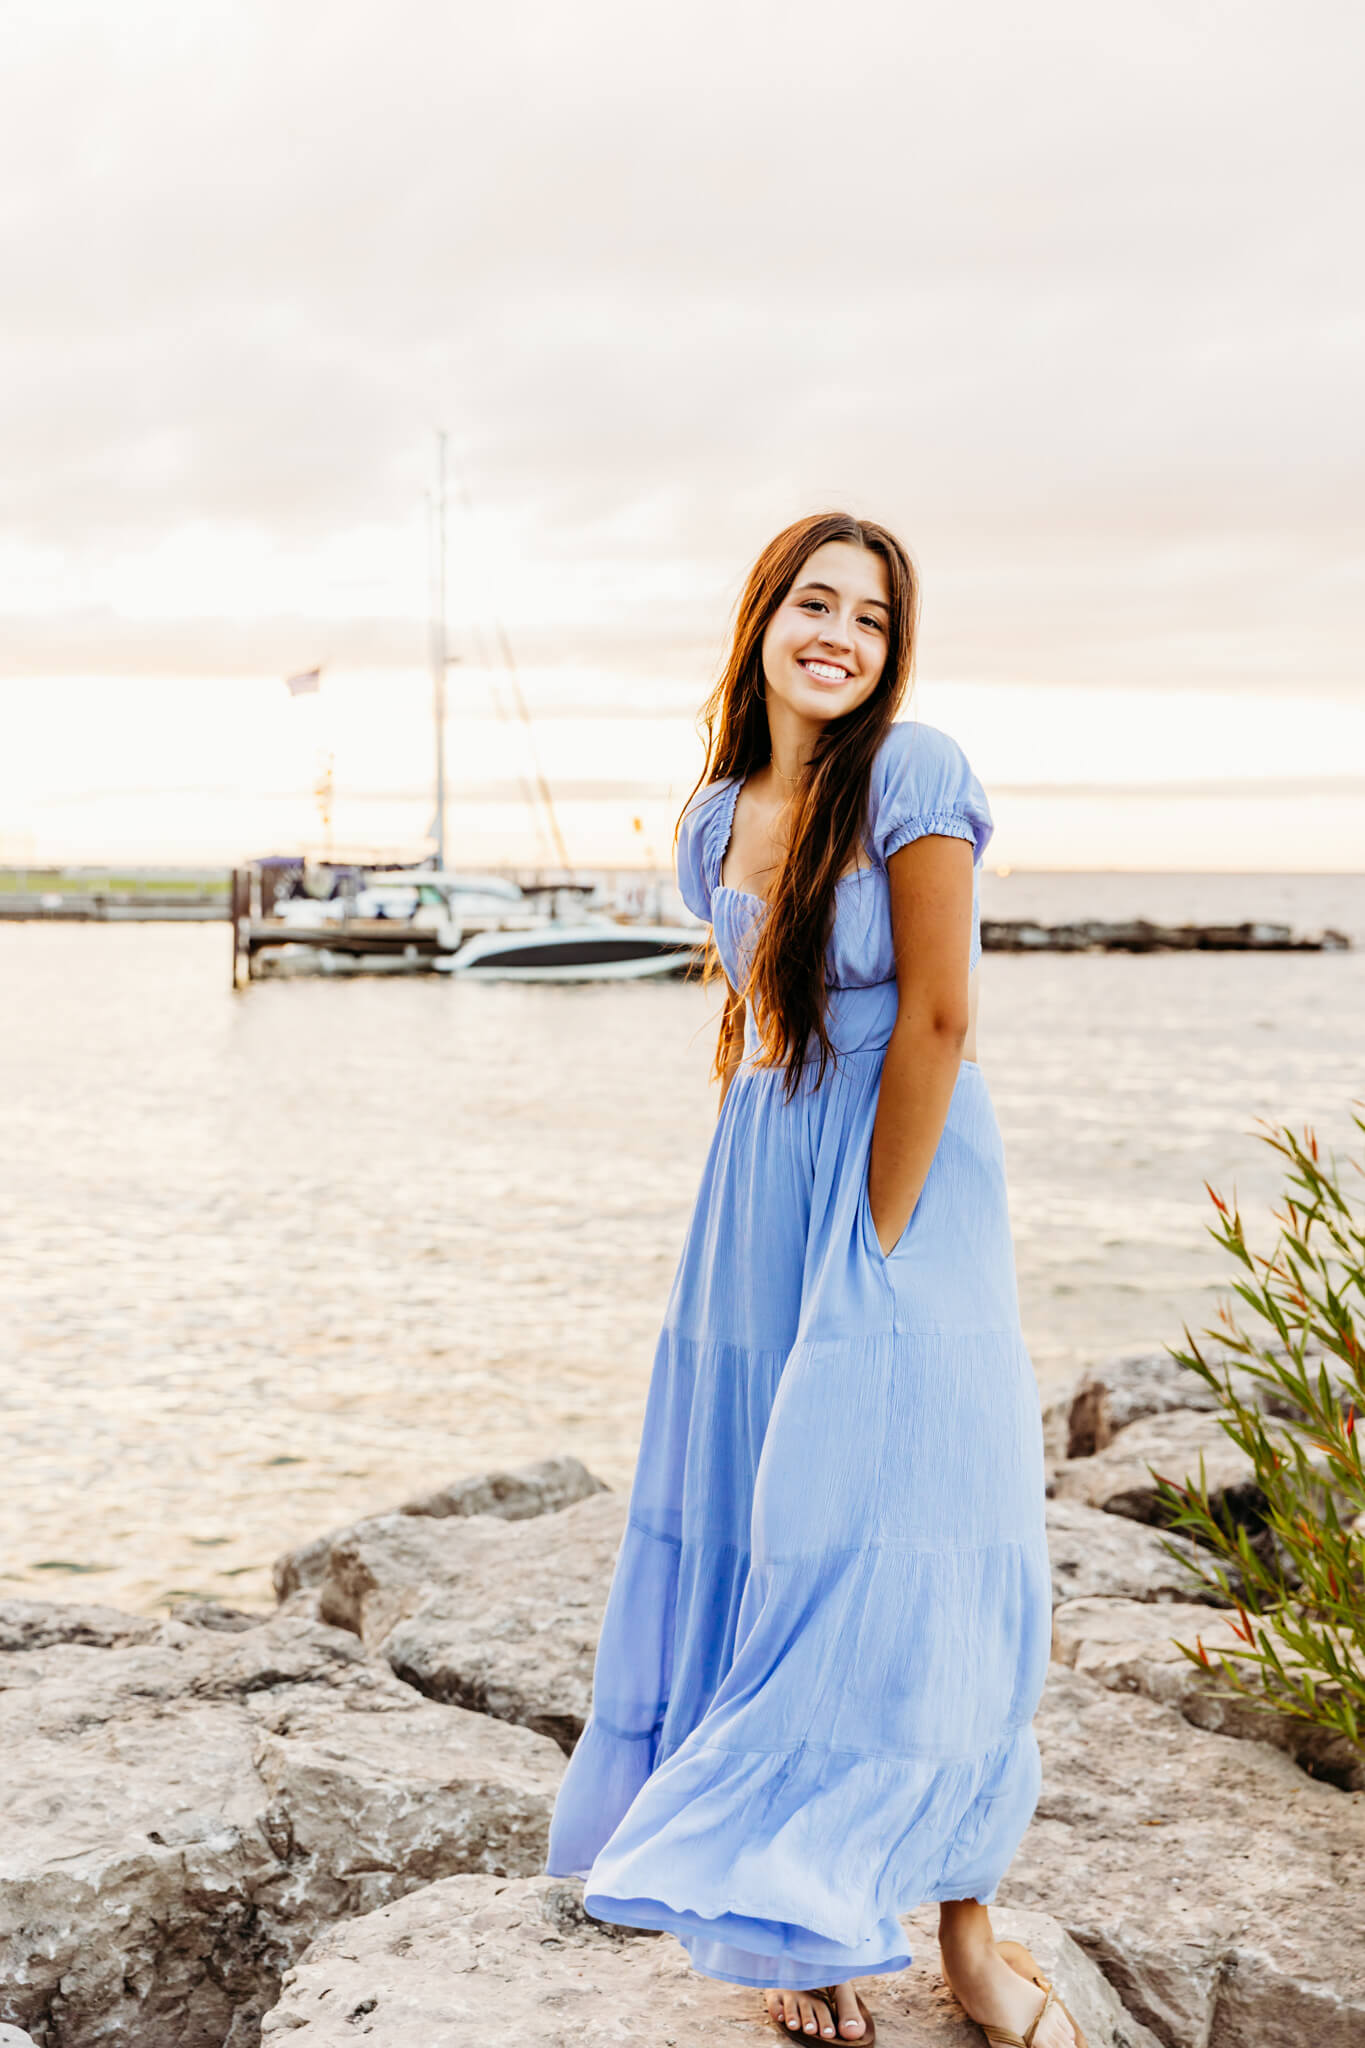 high school teen twirling in her long blue dress while standing on a rocky shore in Door County